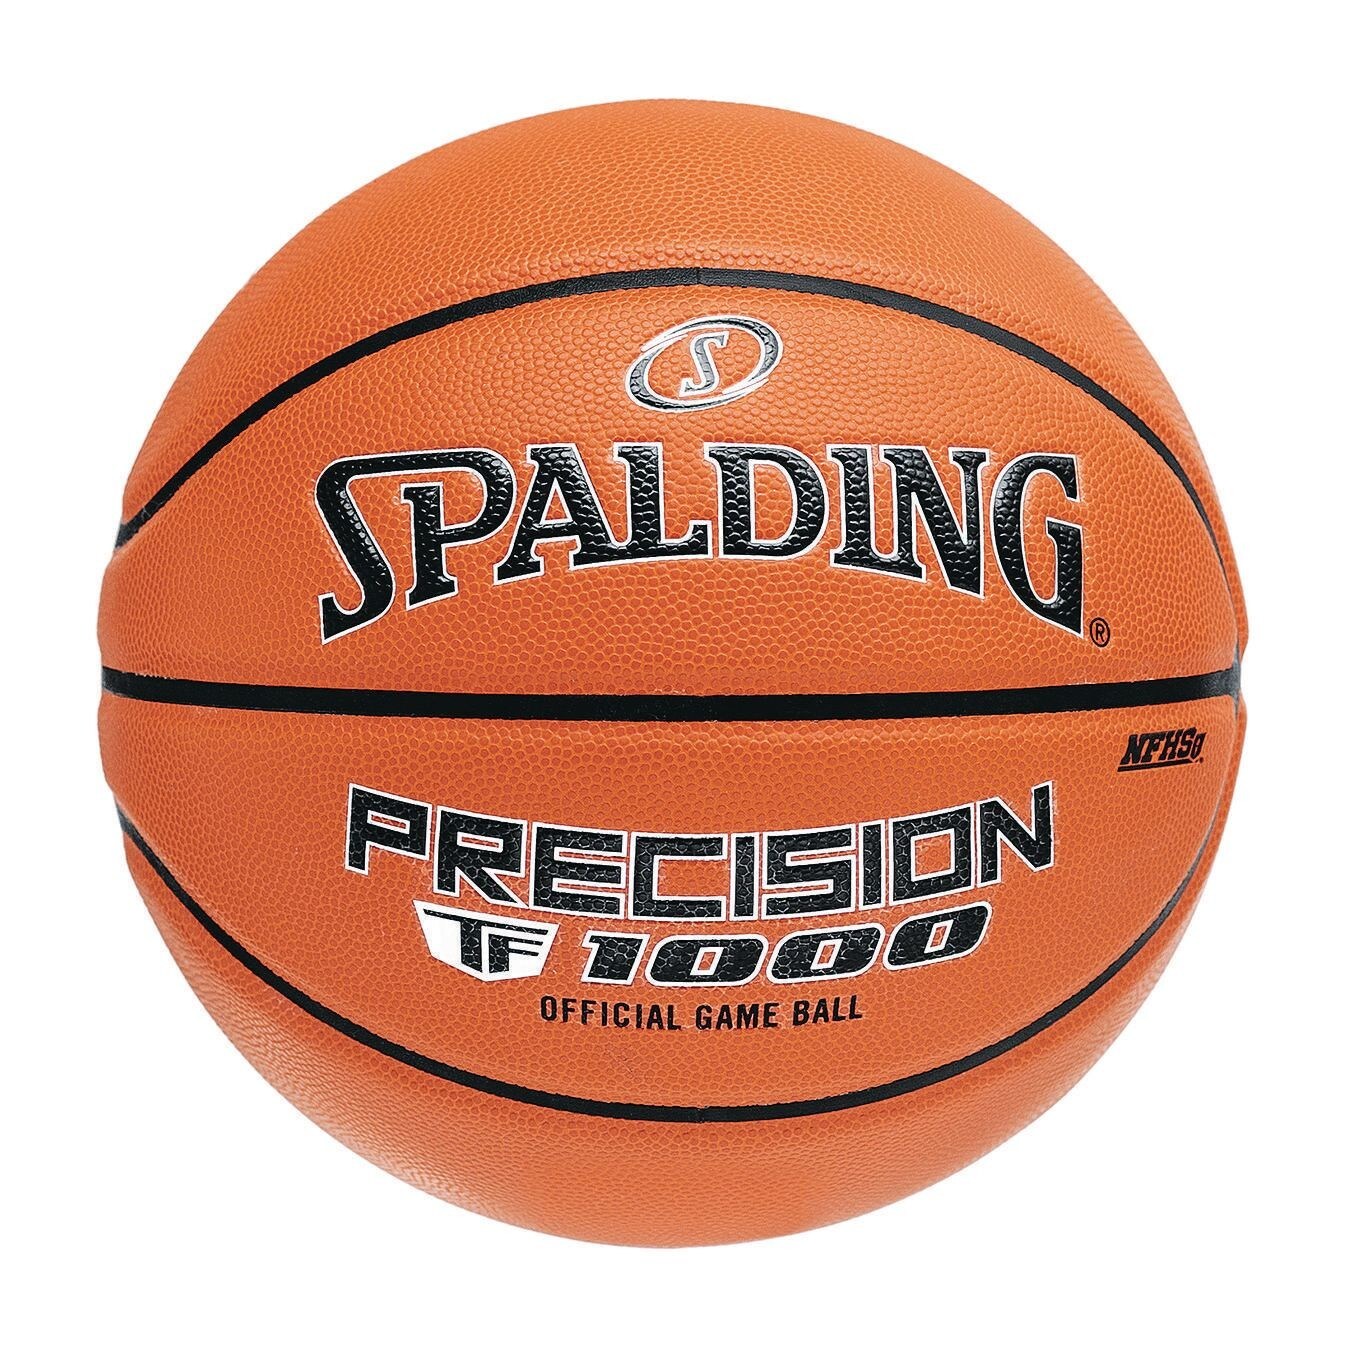 Spalding® Precision TF-1000 NFHS Indoor Composite Basketball | Michaels